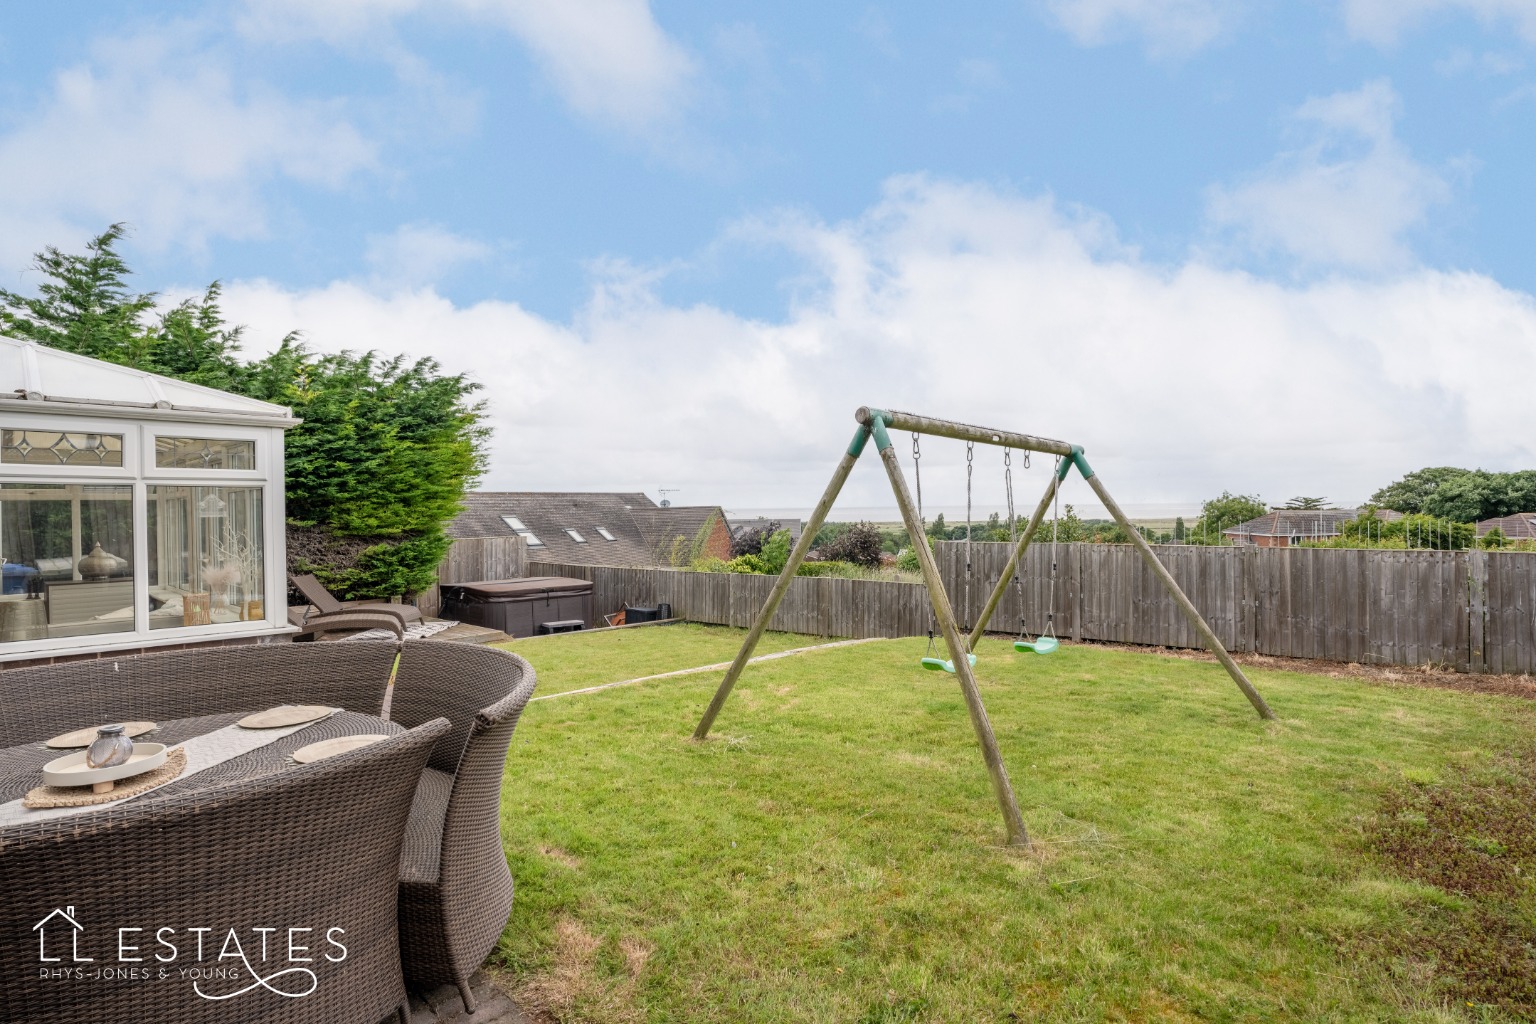 5 bed detached house for sale in Parc Aberconwy, Denbighshire  - Property Image 14